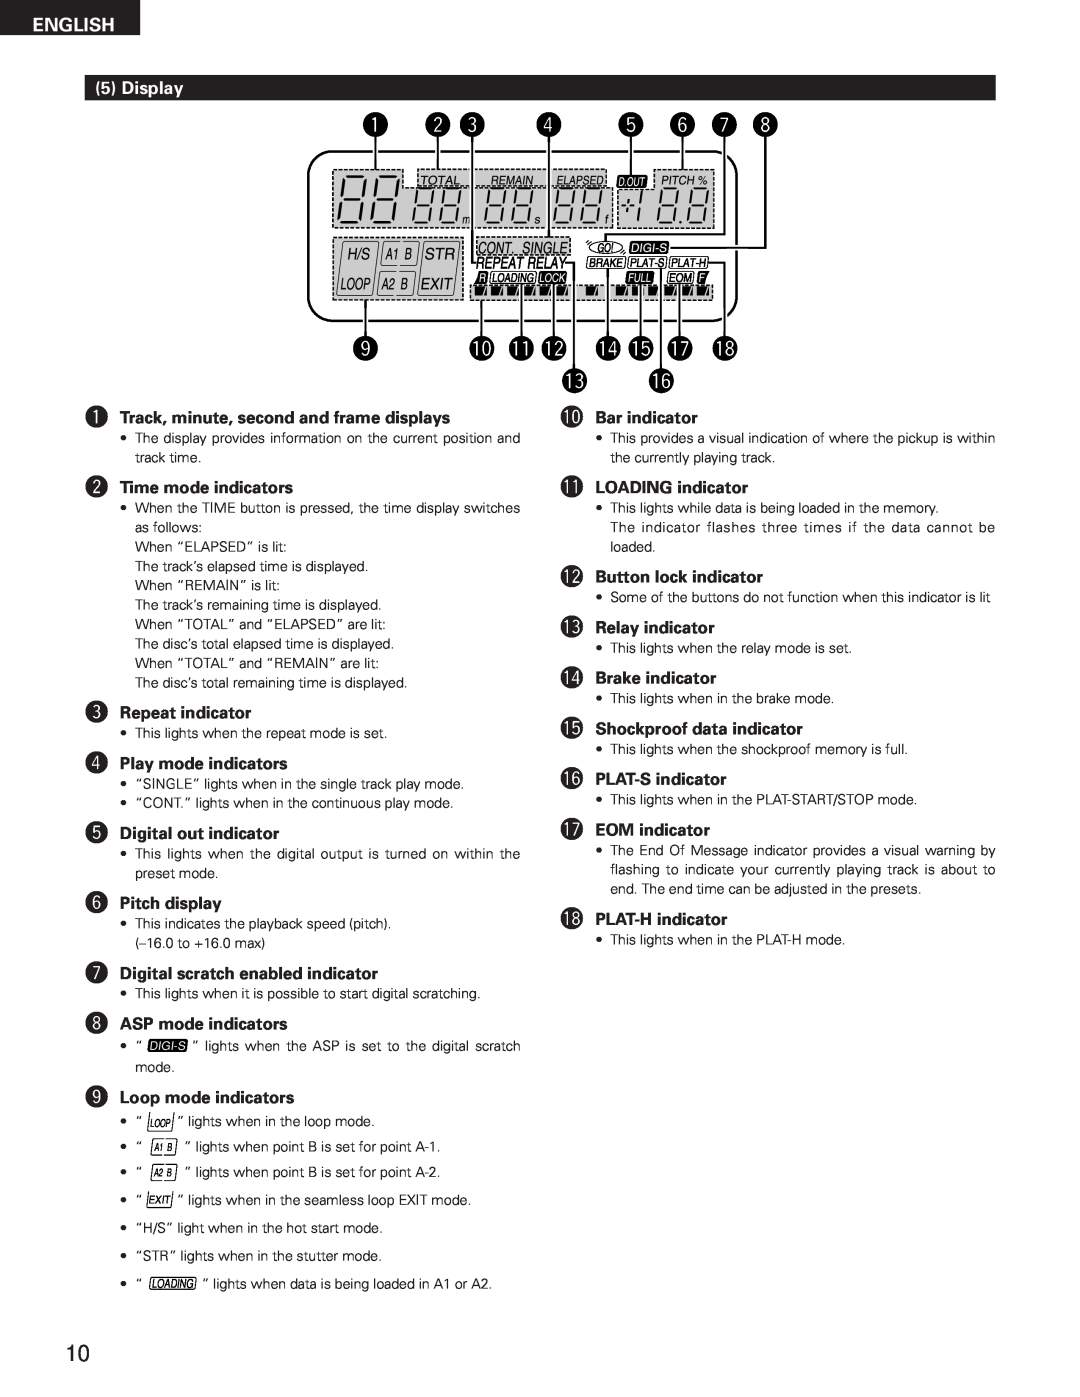 Denon DN-2100F operating instructions Display, English, qTrack, minute, second and frame displays 